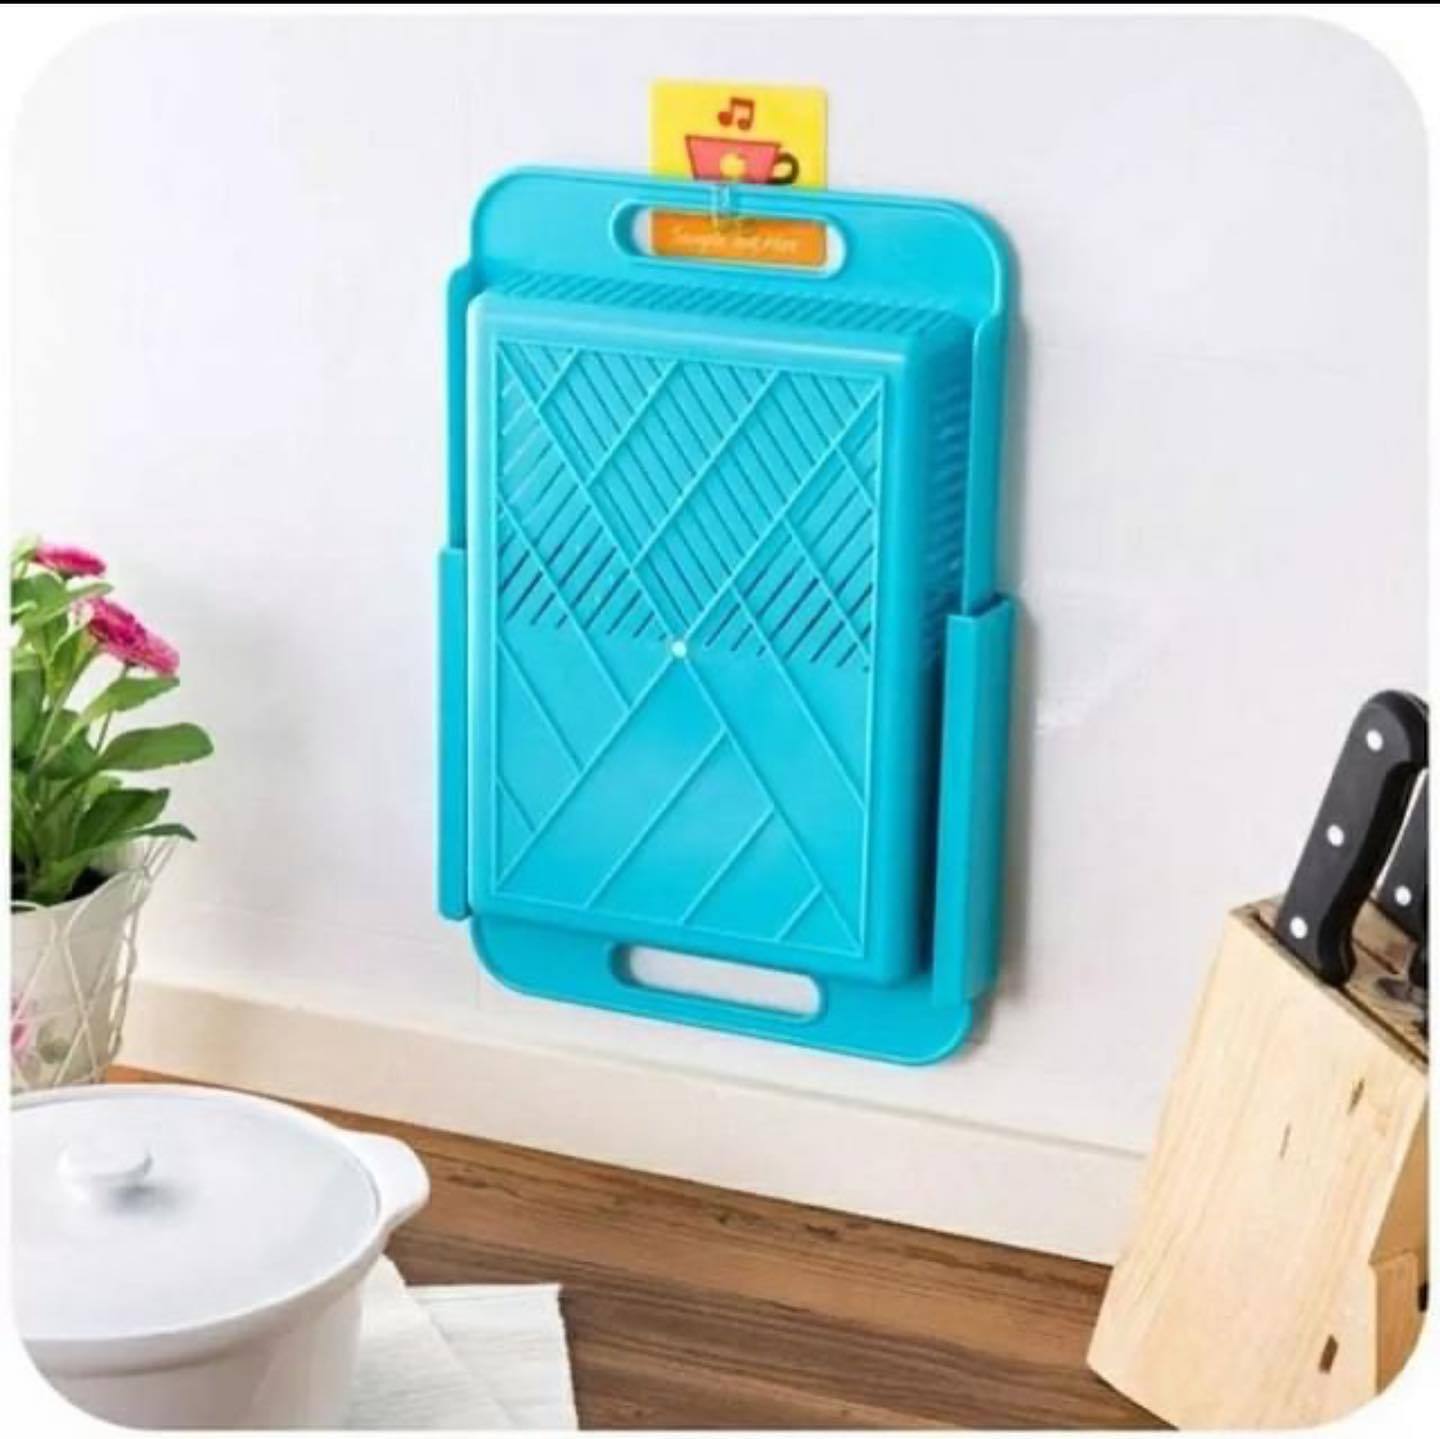 Chop - N - Store Cutting Chopping Board with Tray & Strainers (Multi Color)